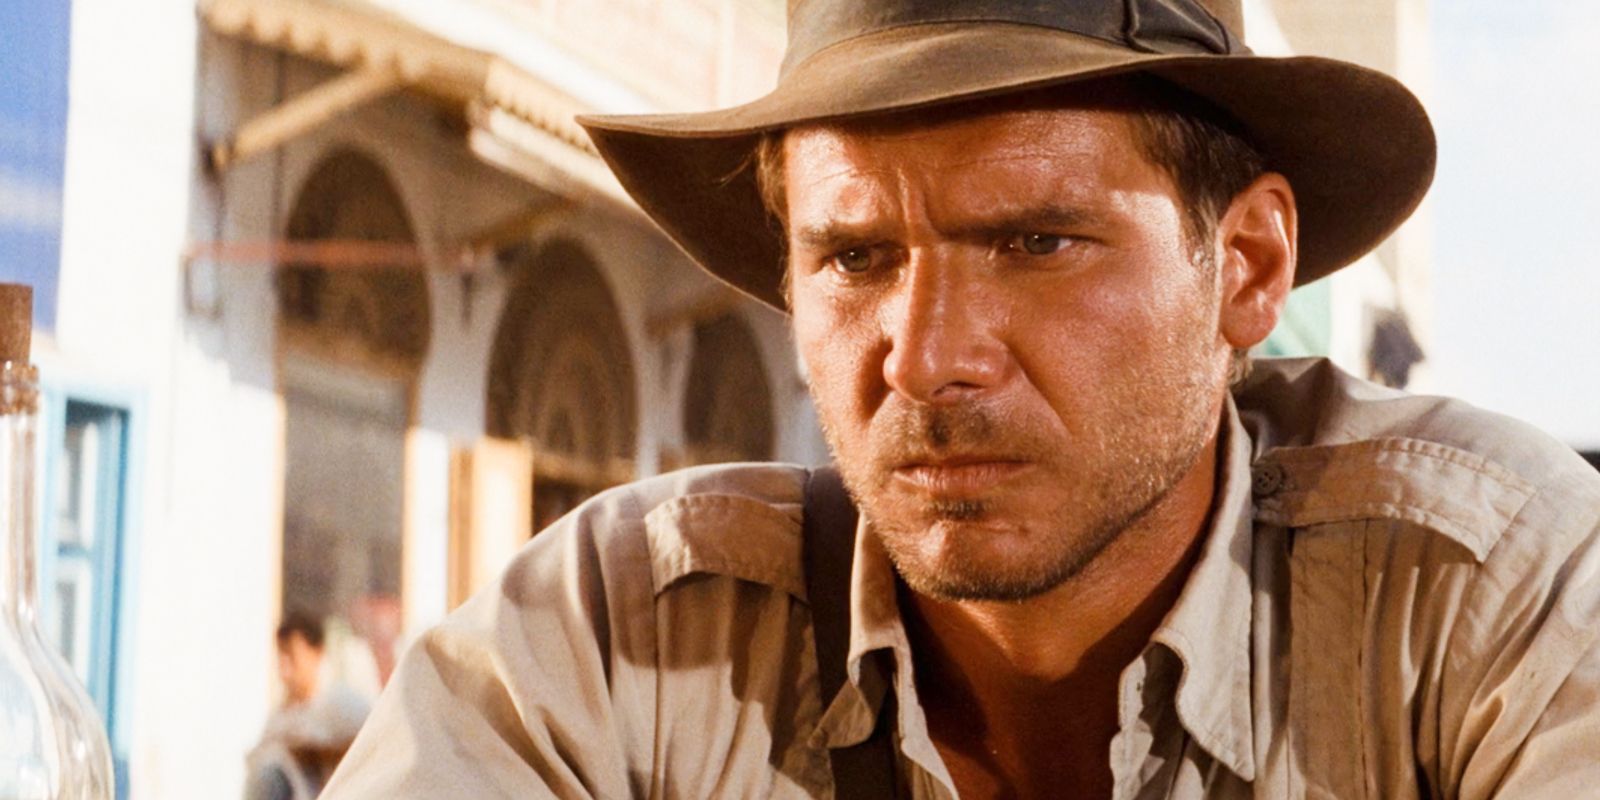 10 BTS Stories From Indiana Jones That Prove Harrison Ford Is The Ultimate Movie Star